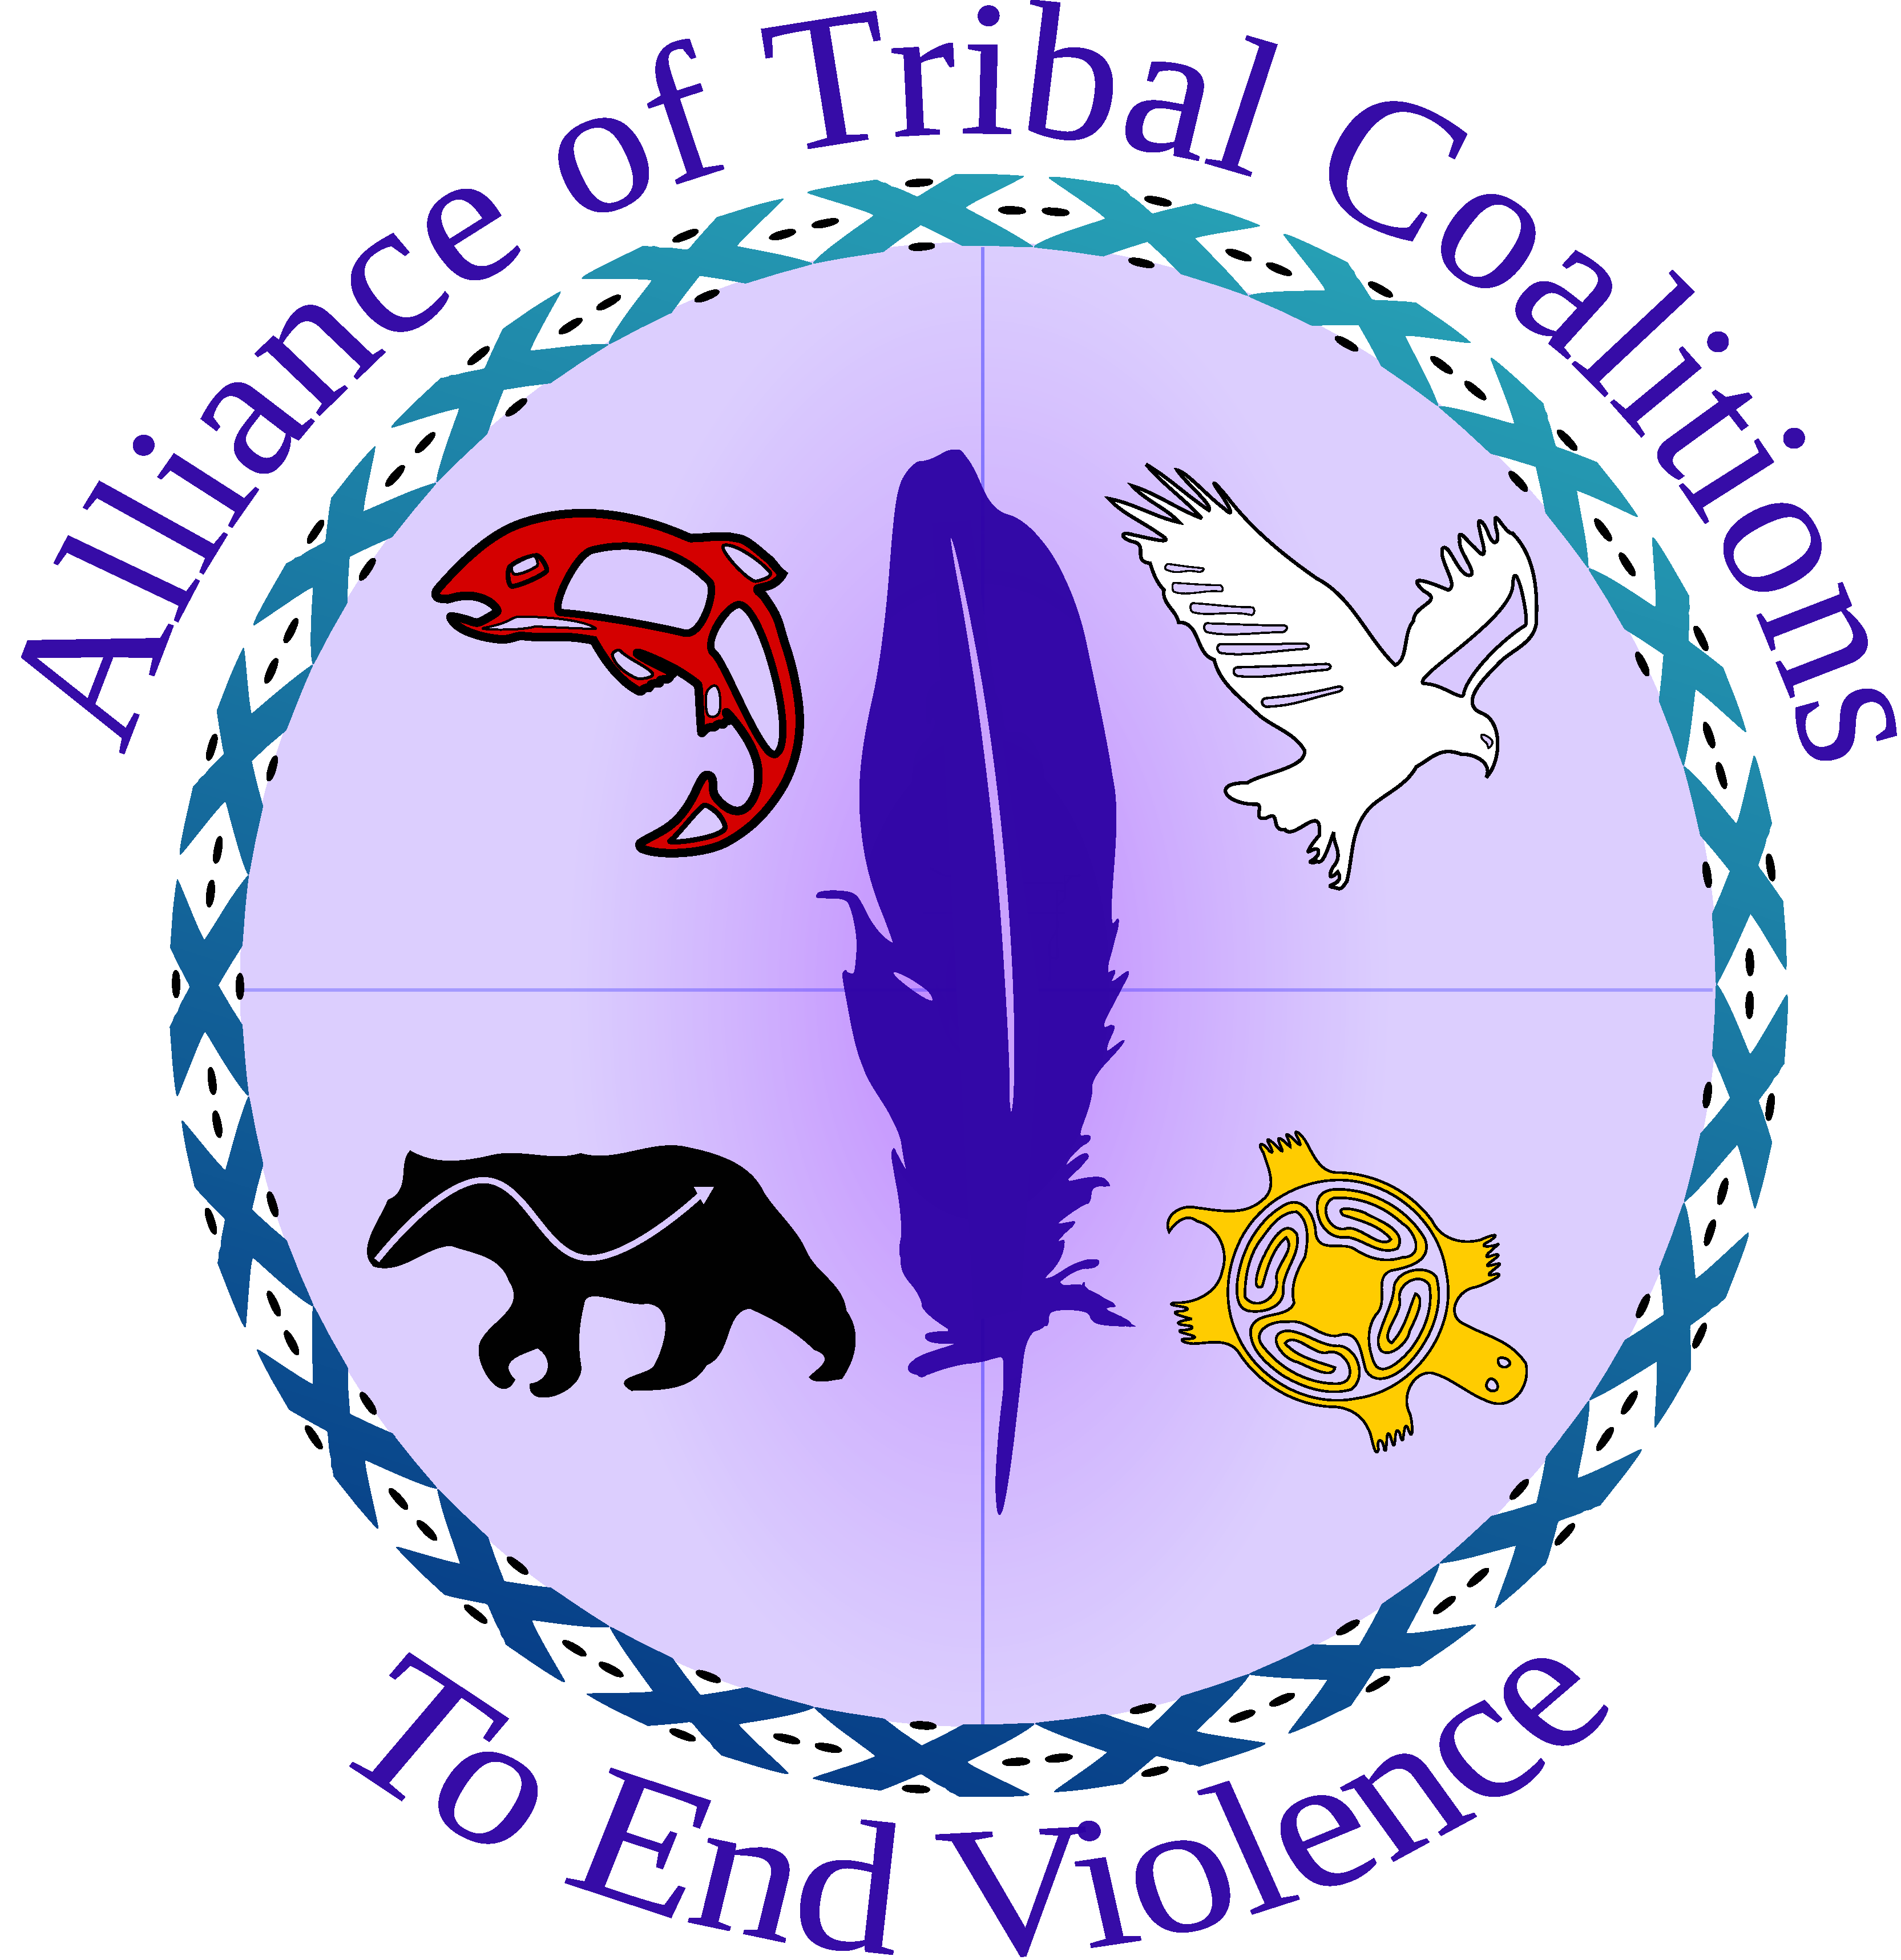 Alliance of Tribal Coalitions to End Violence